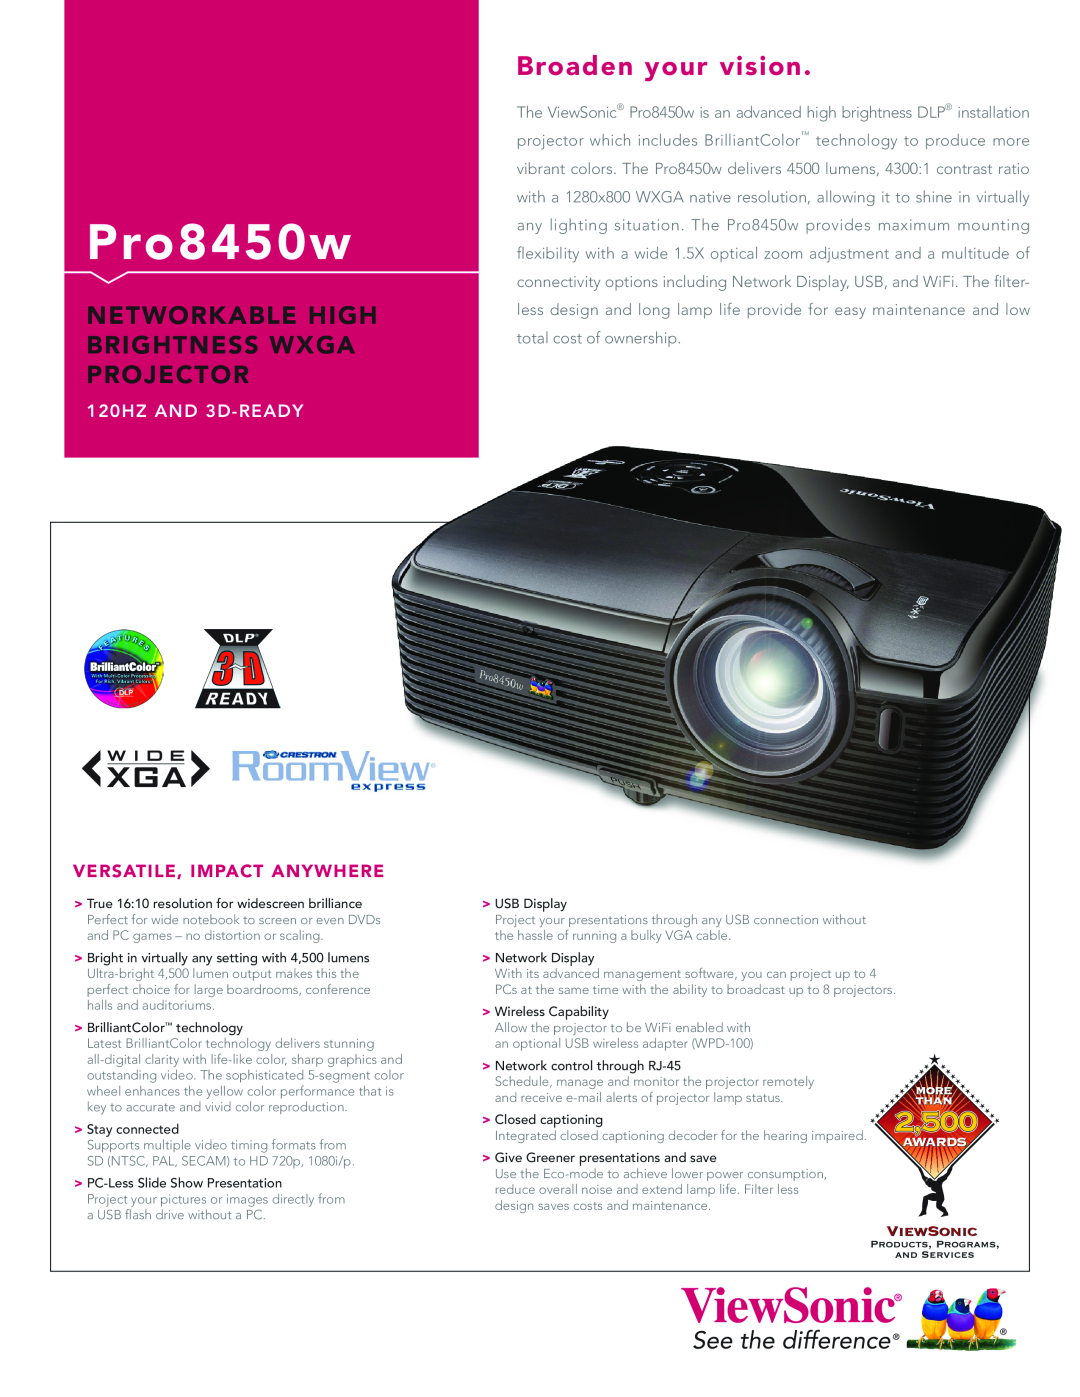 ViewSonic PRO8450W manual Pro8450w, Broaden your vision, Networkable High Brightness Wxga Projector, 120HZ AND 3D-READY 